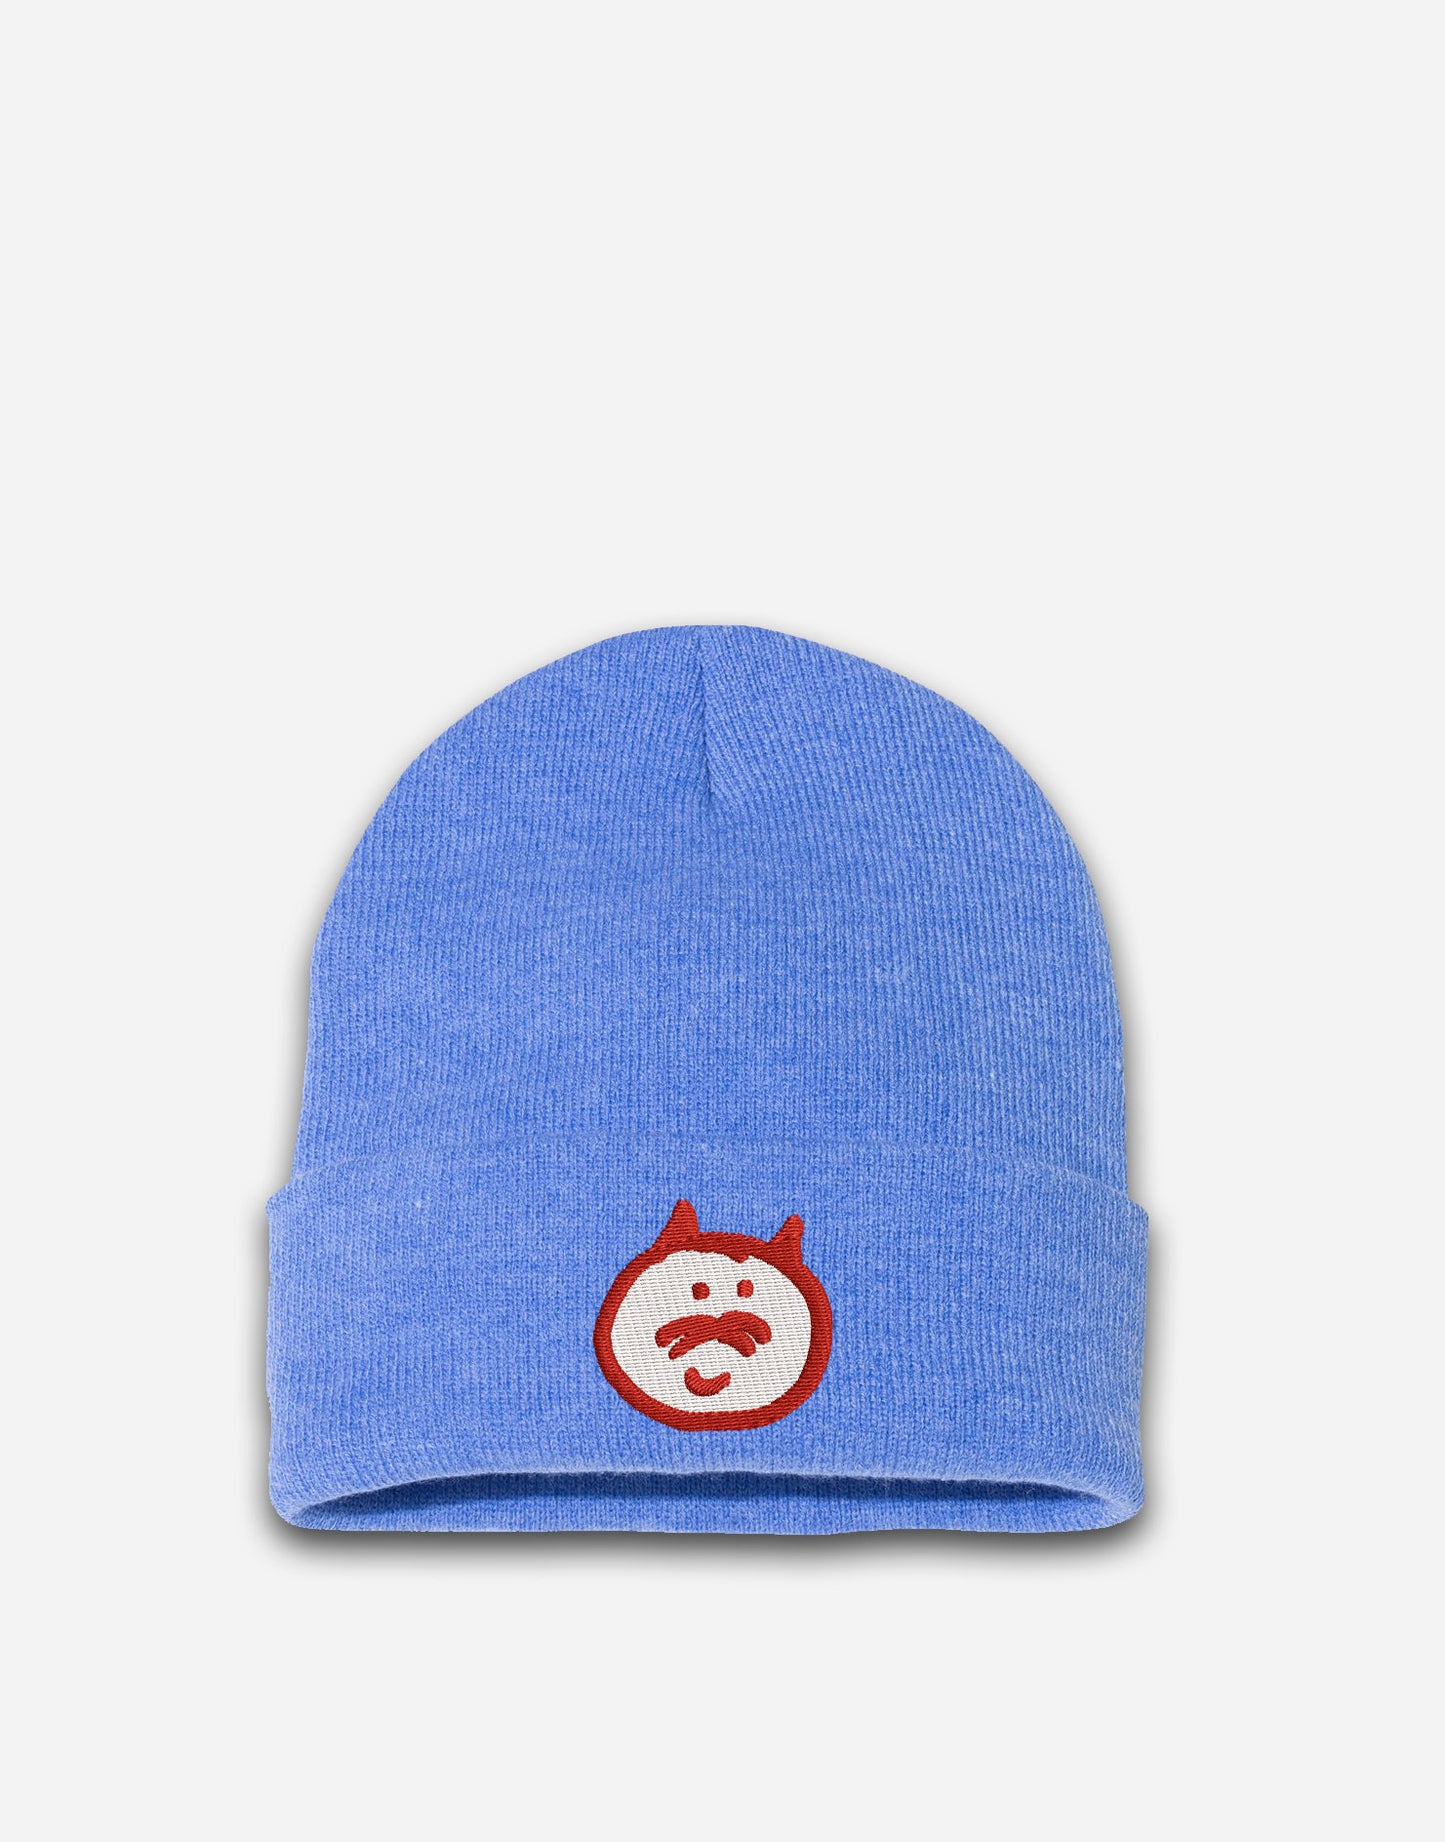 RedCat Embroidered Beanie Blue